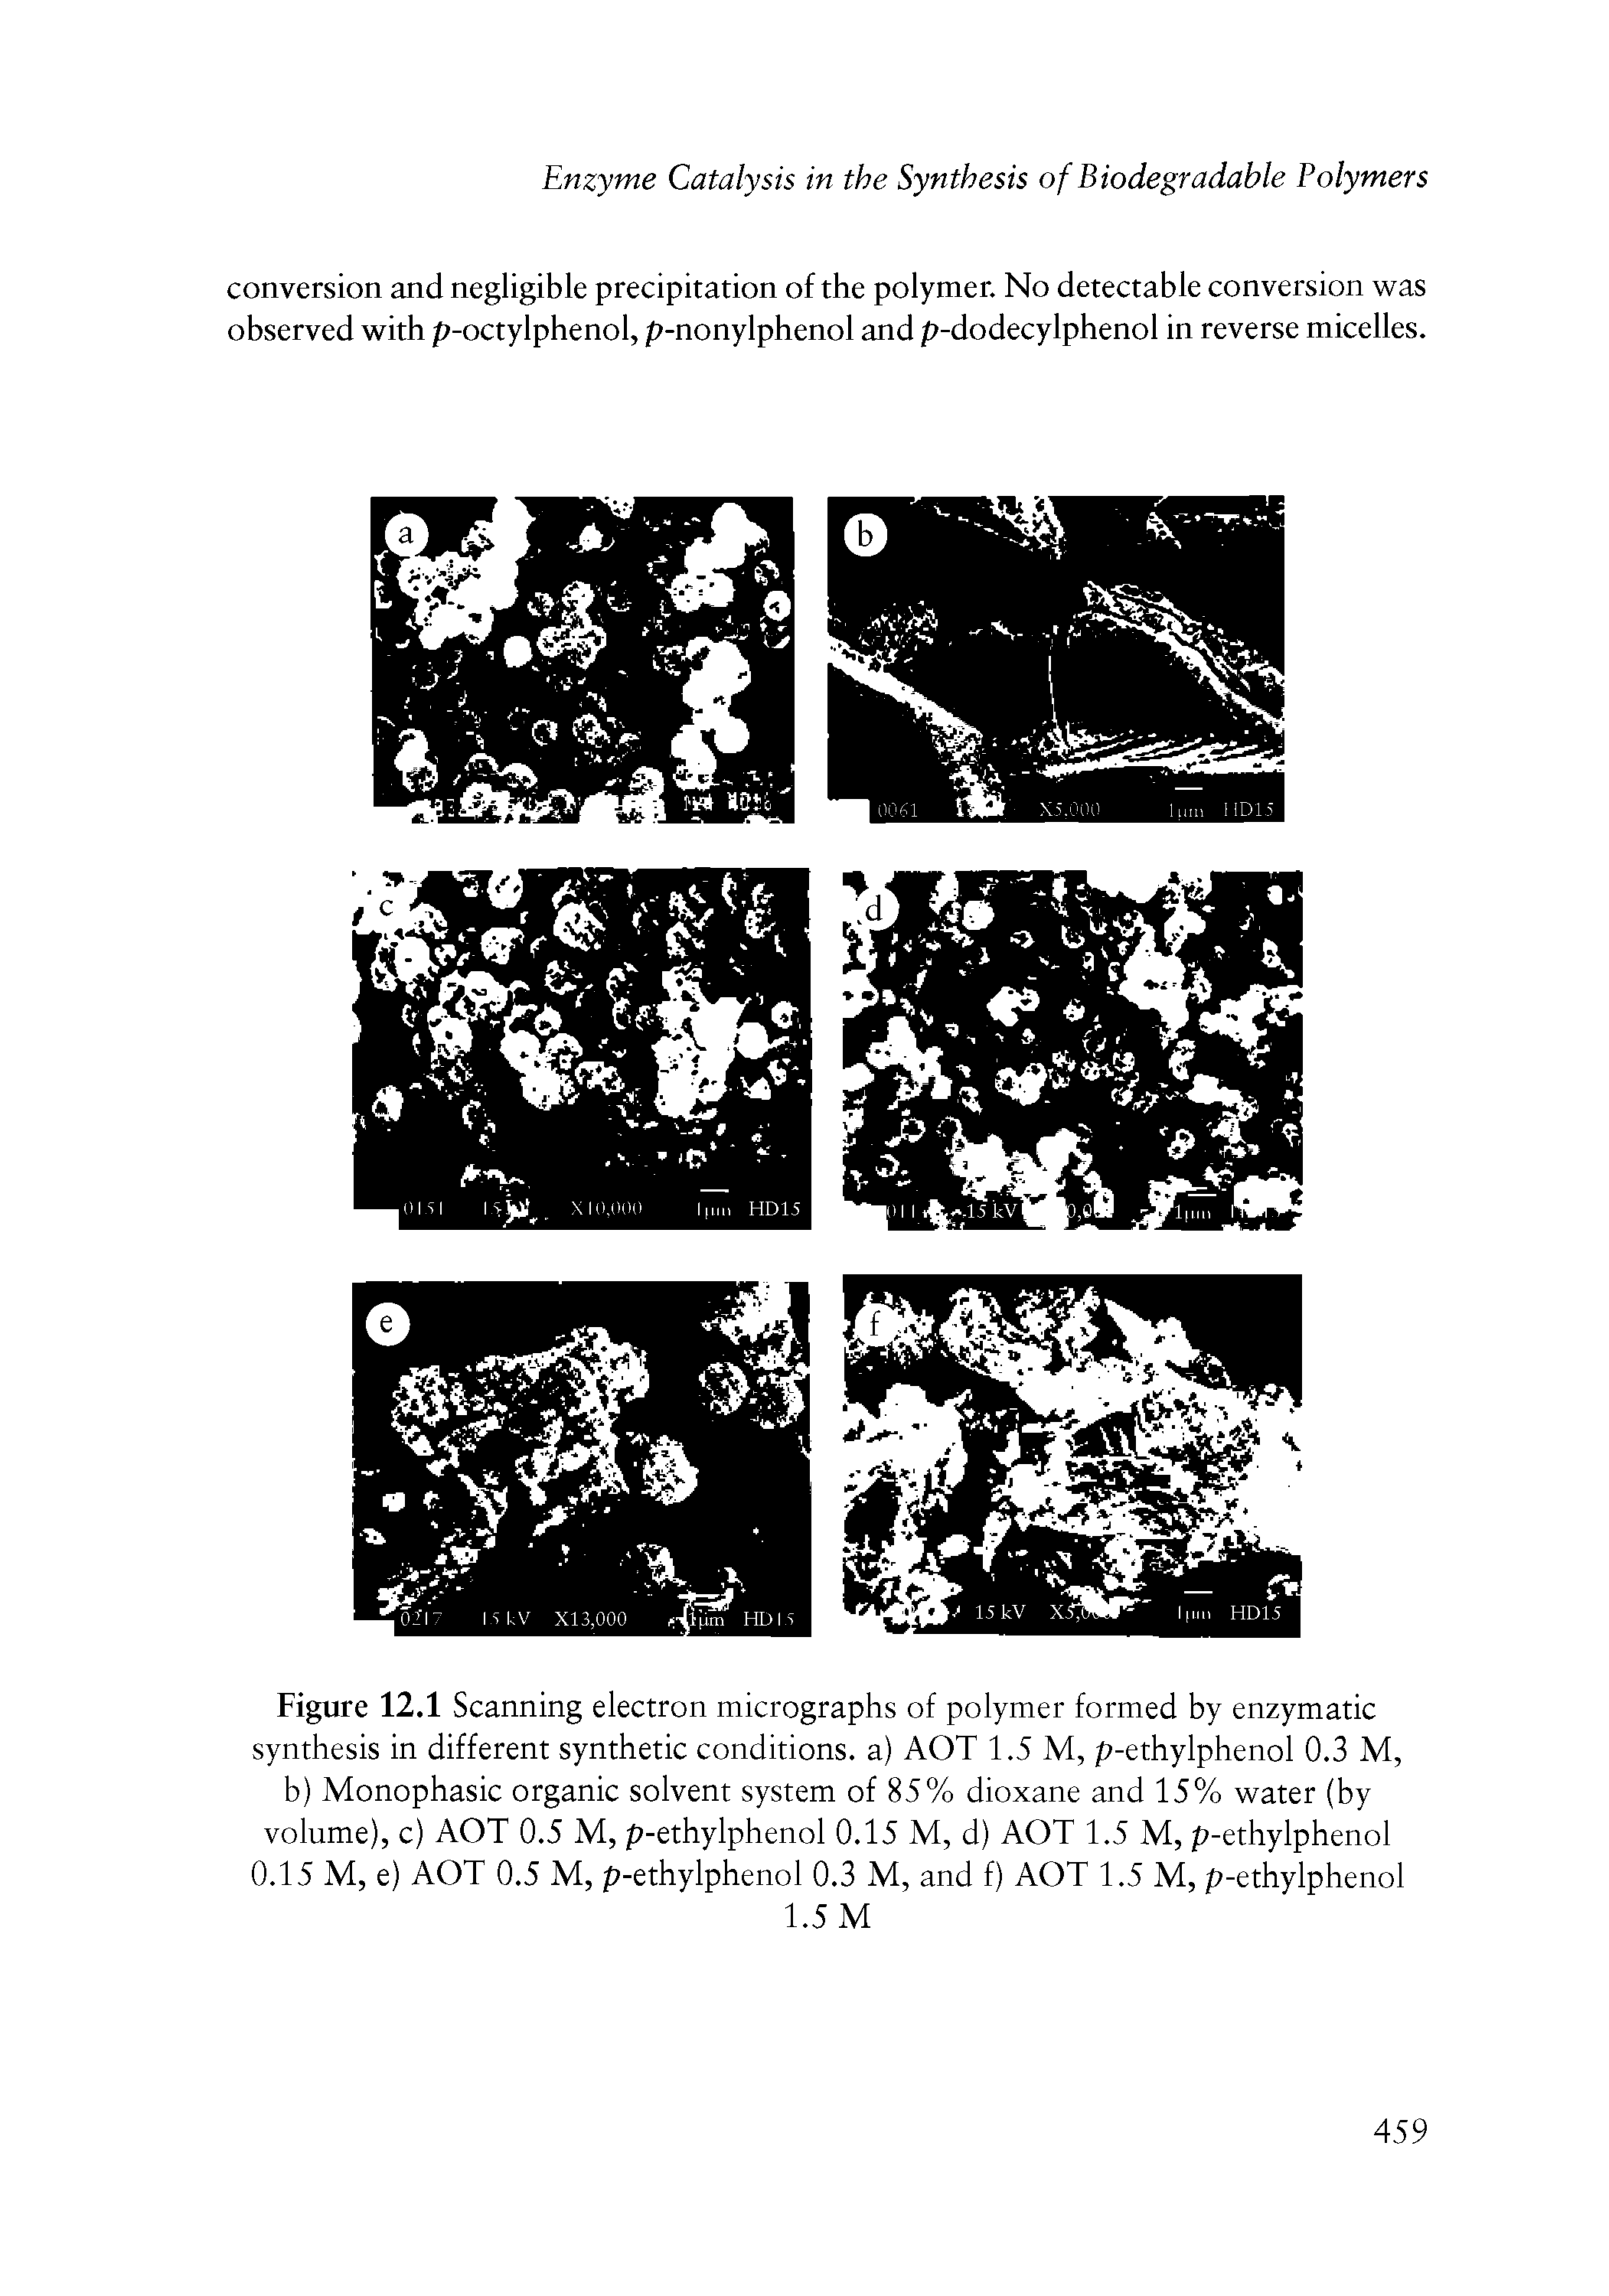 Figure 12.1 Scanning electron micrographs of polymer formed by enzymatic synthesis in different synthetic conditions, a) AOT 1.5 M, p-ethylphenol 0.3 M, b) Monophasic organic solvent system of 85% dioxane and 15% water (by volume), c) AOT 0.5 M, p-ethylphenol 0.15 M, d) AOT 1.5 M, p-ethylphenol 0.15 M, e) AOT 0.5 M, p-ethylphenol 0.3 M, and f) AOT 1.5 M, p-ethylphenol...